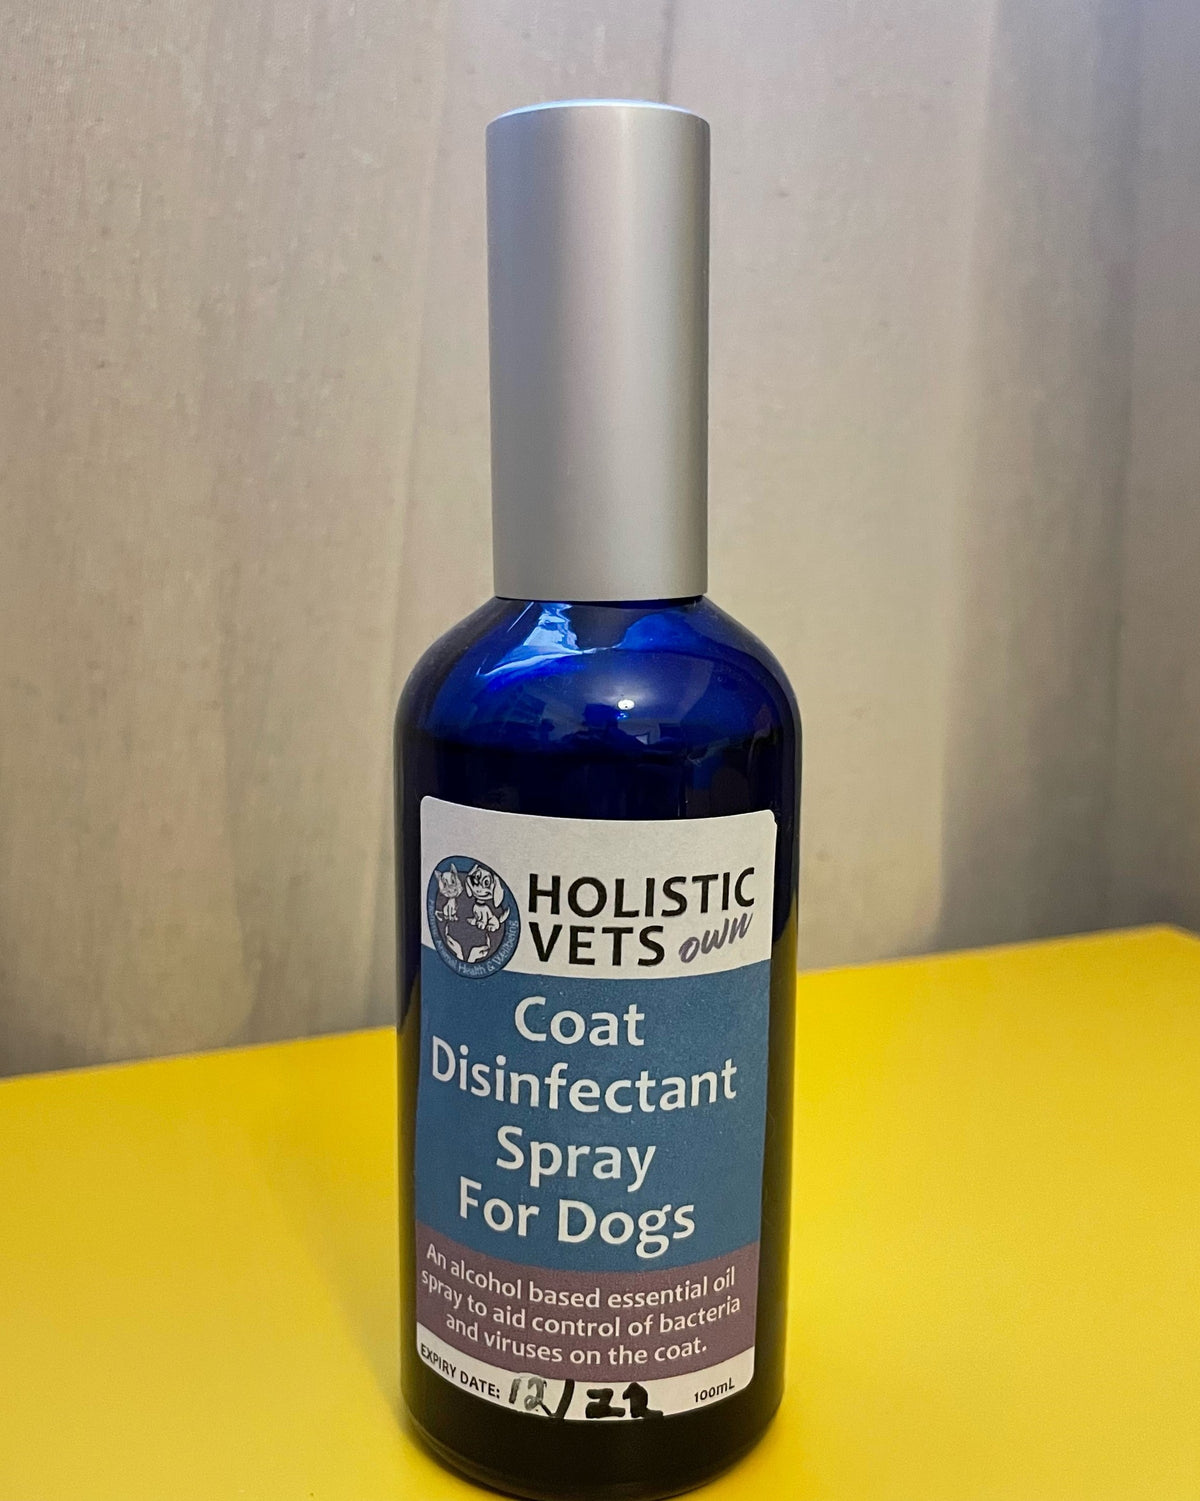 Holistic Vets Own Coat Disinfectant Spray For Dogs (100ml)